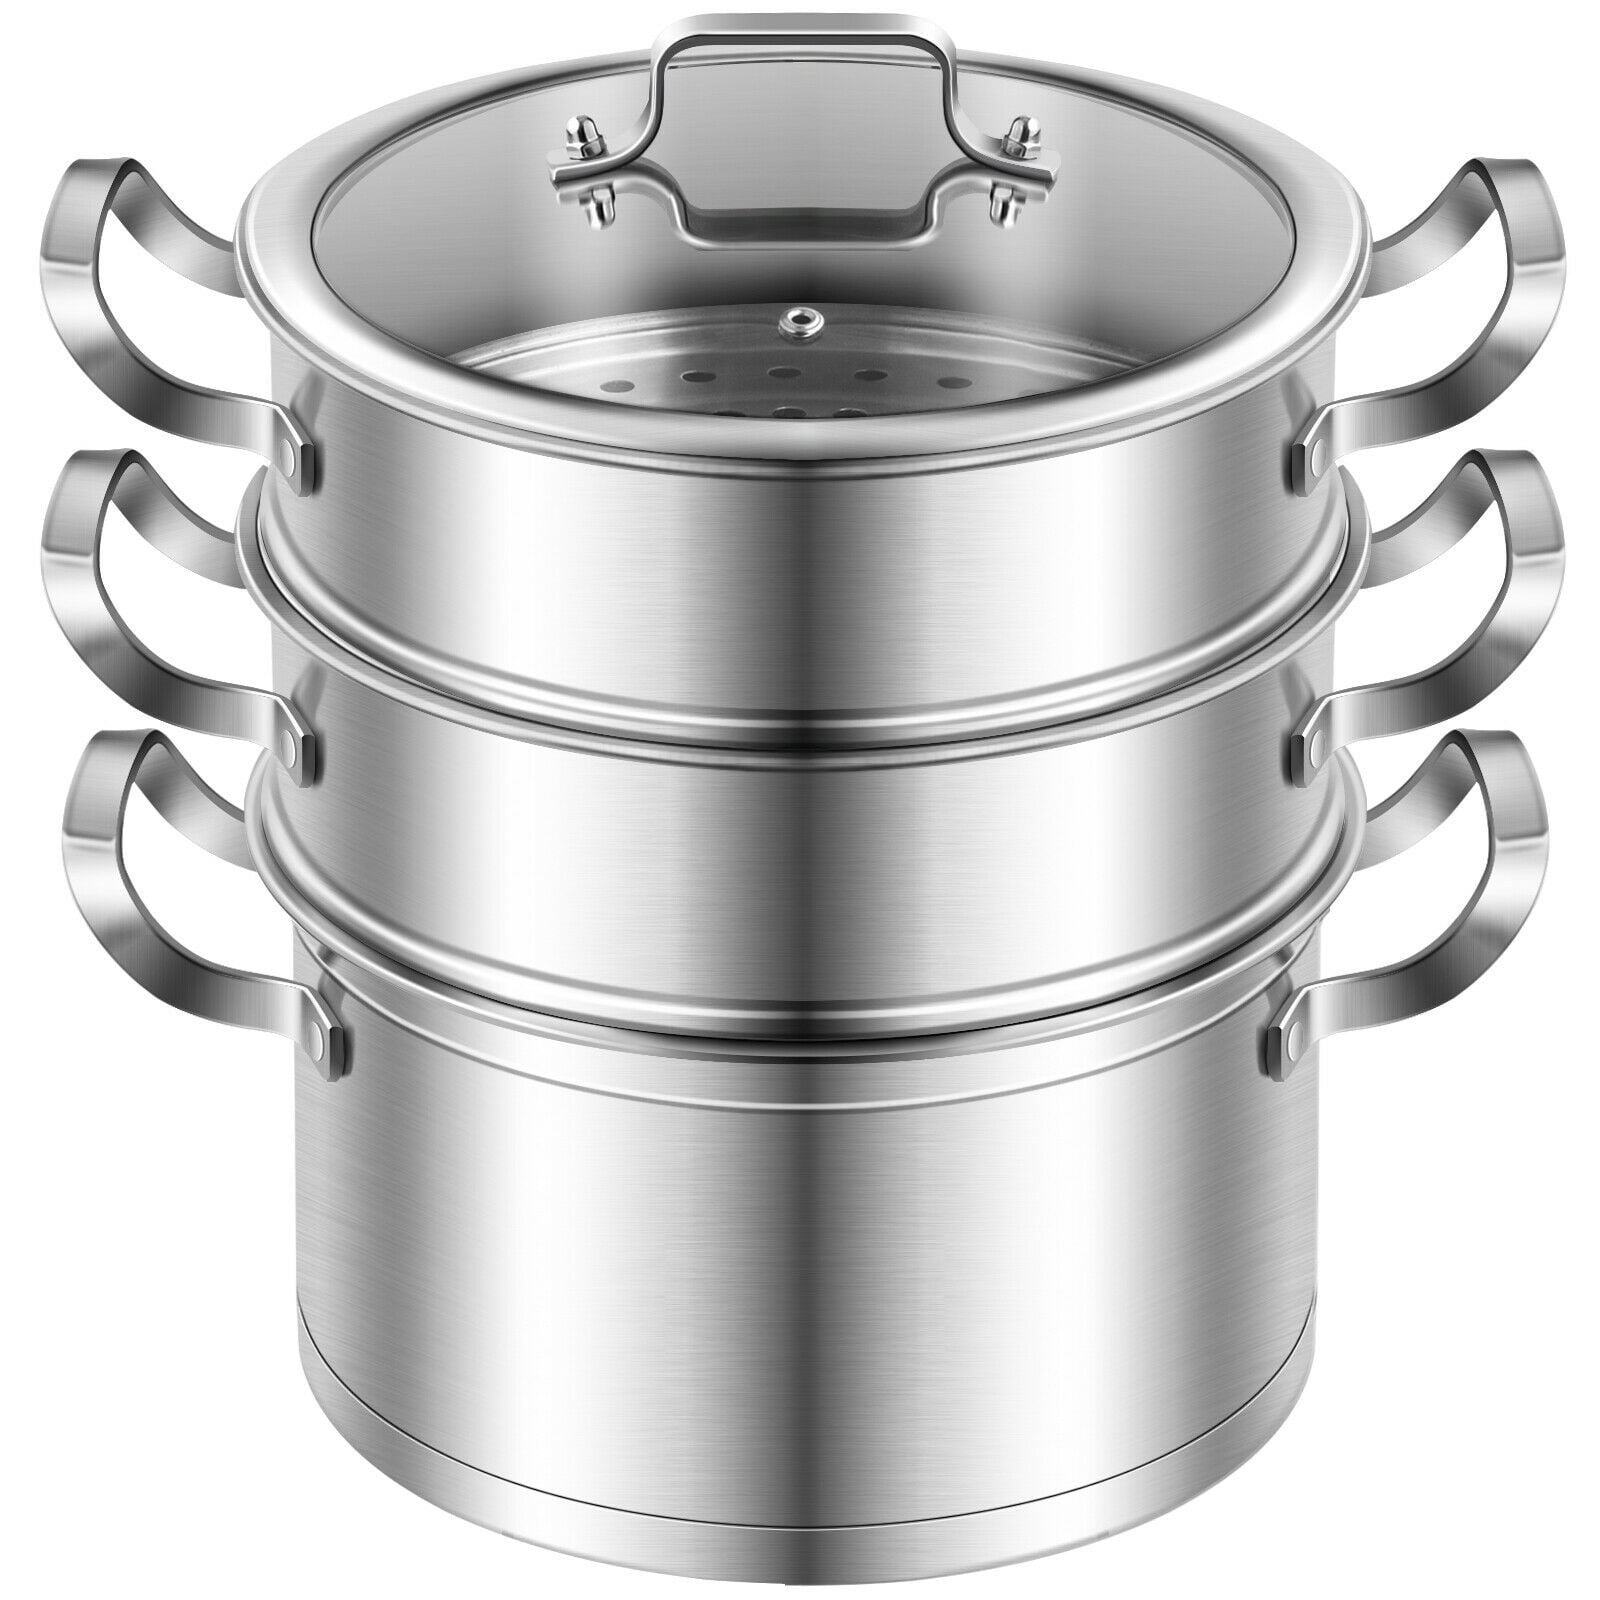 3-Tier Food Steamer Total 12-quart capacity Easy use controls stainless steel 